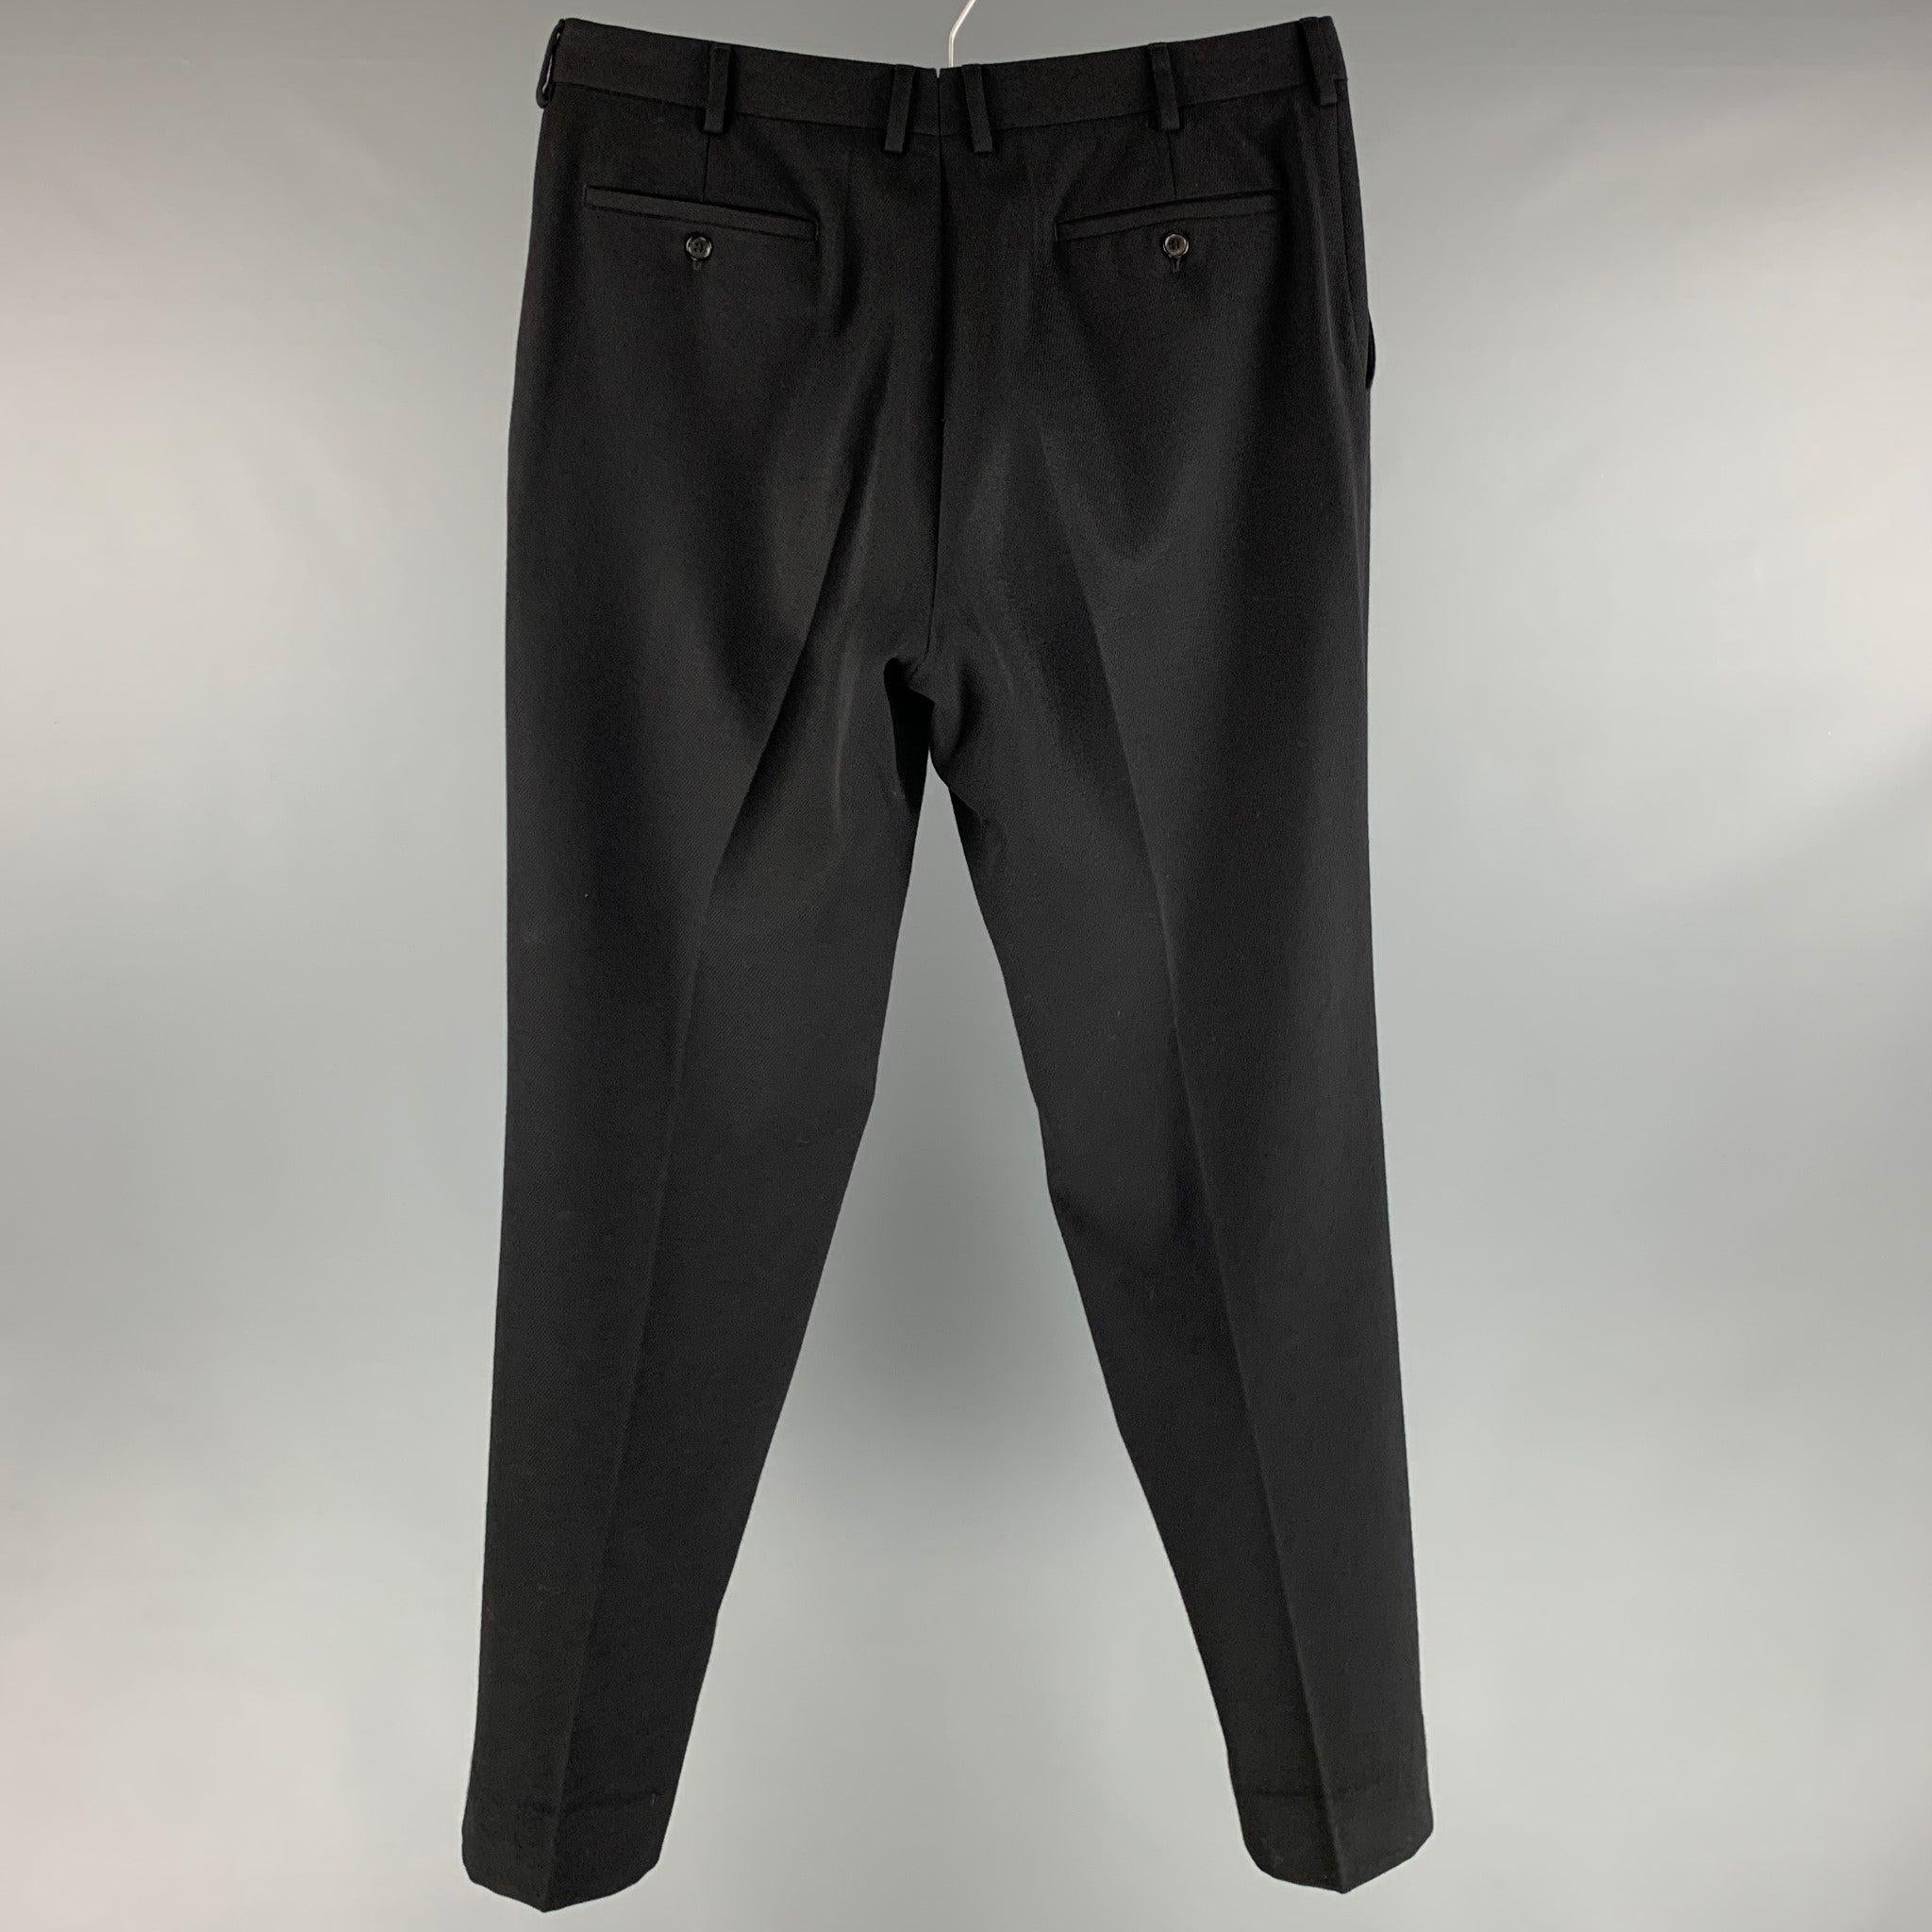 RALPH LAUREN Size 36 Black Twill Wool Flat Front Dress Pants In Good Condition For Sale In San Francisco, CA